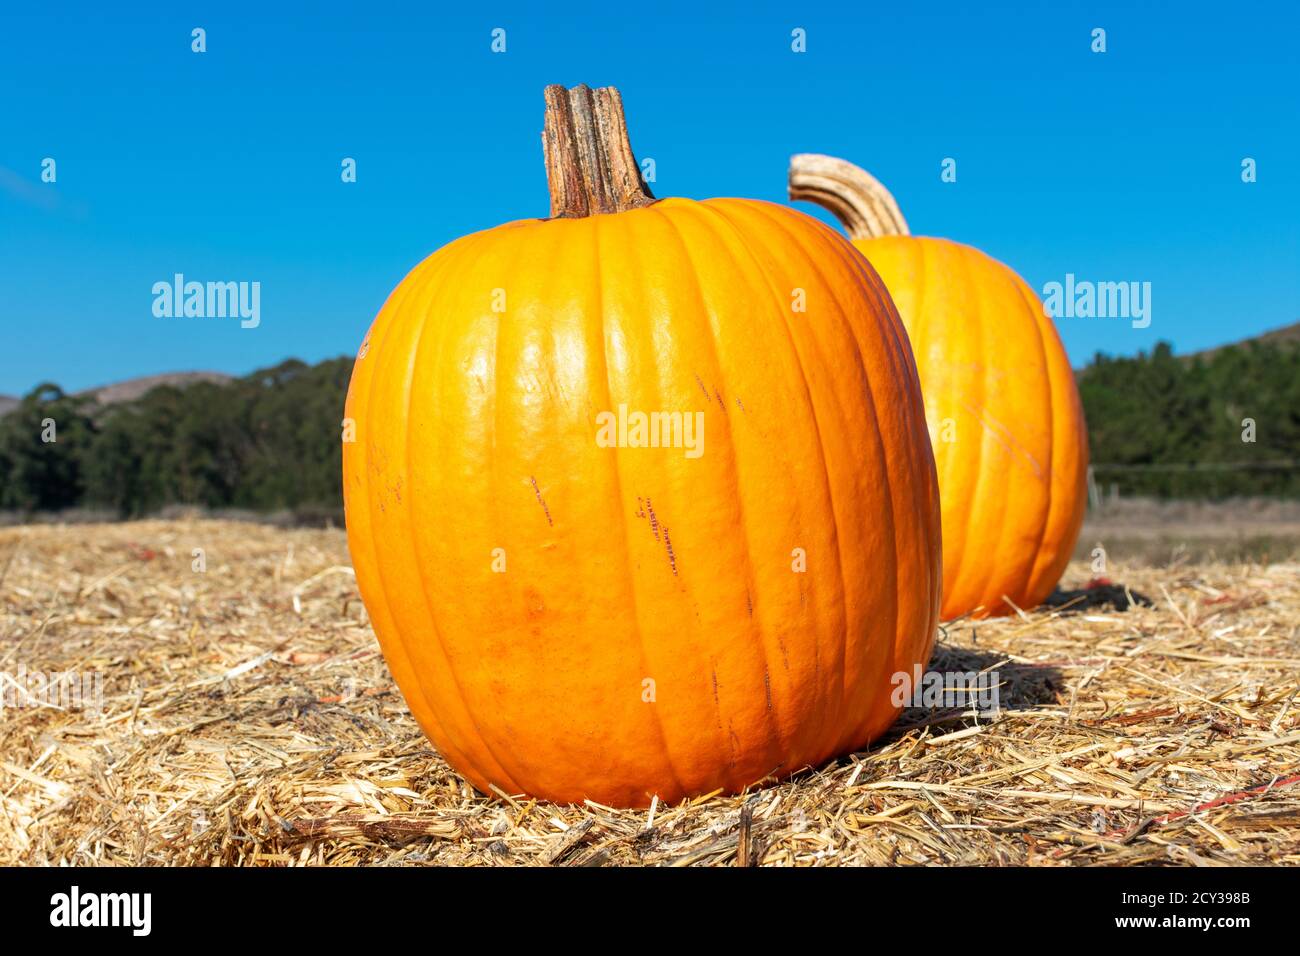 Two pumpkins at the pumpkin patch field. Blue sky background. Stock Photo